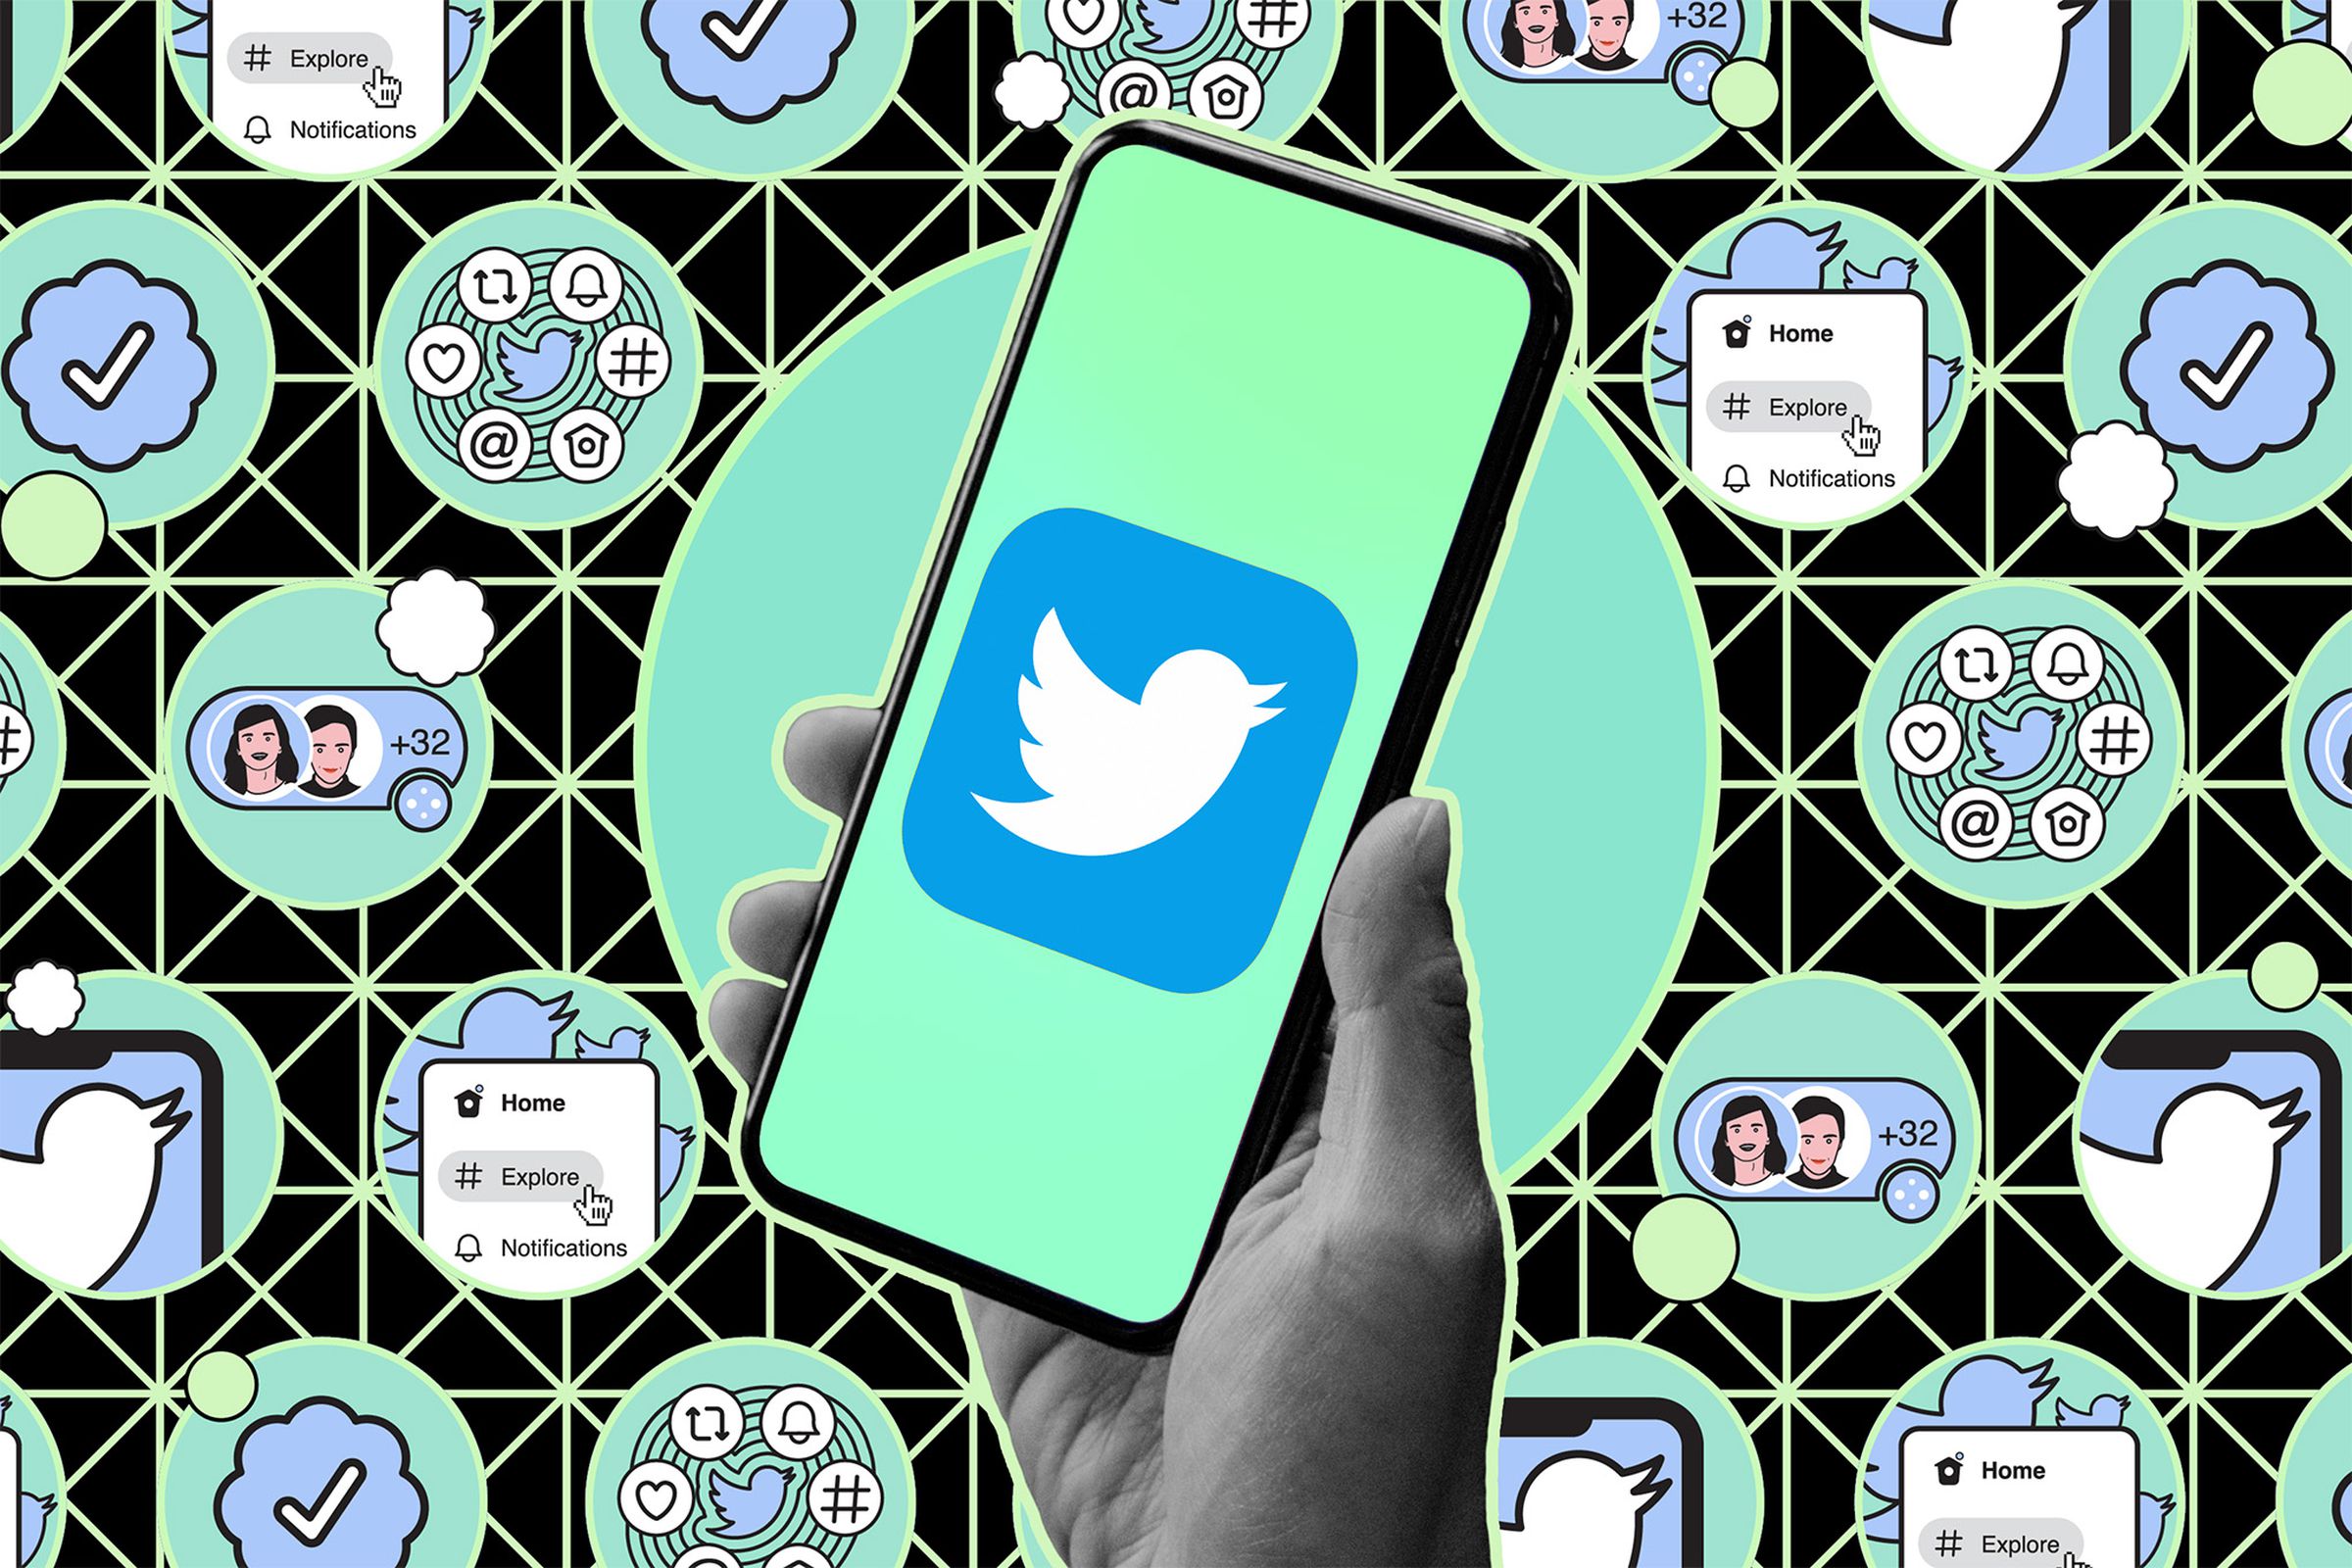 Hand holding phone with Twitter logo against an illustrated background